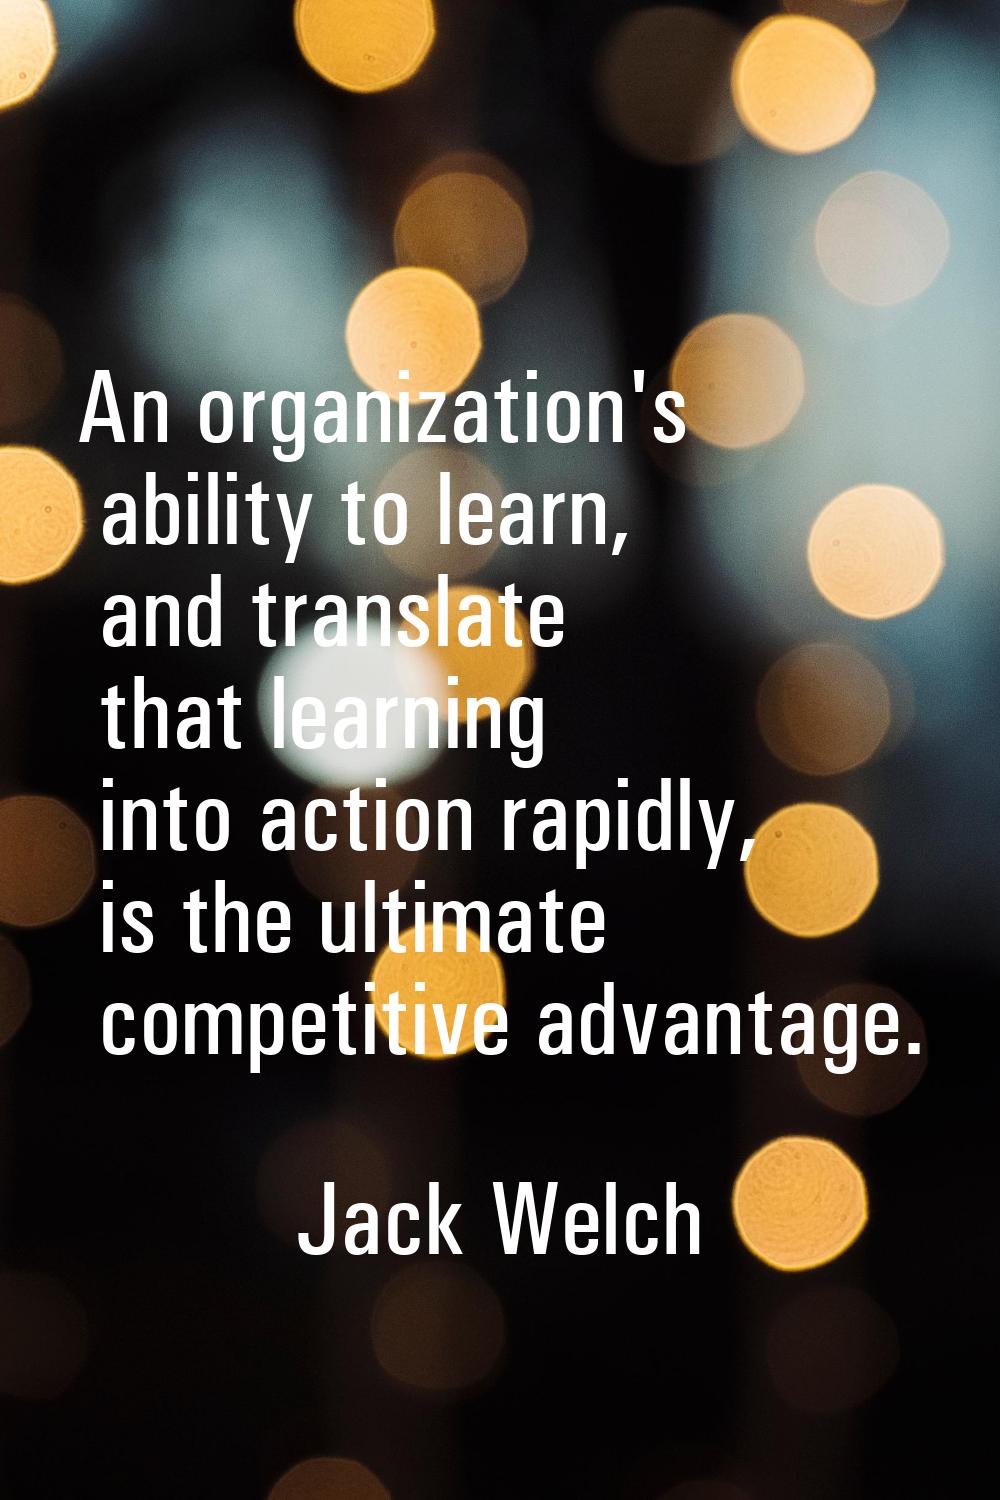 An organization's ability to learn, and translate that learning into action rapidly, is the ultimat